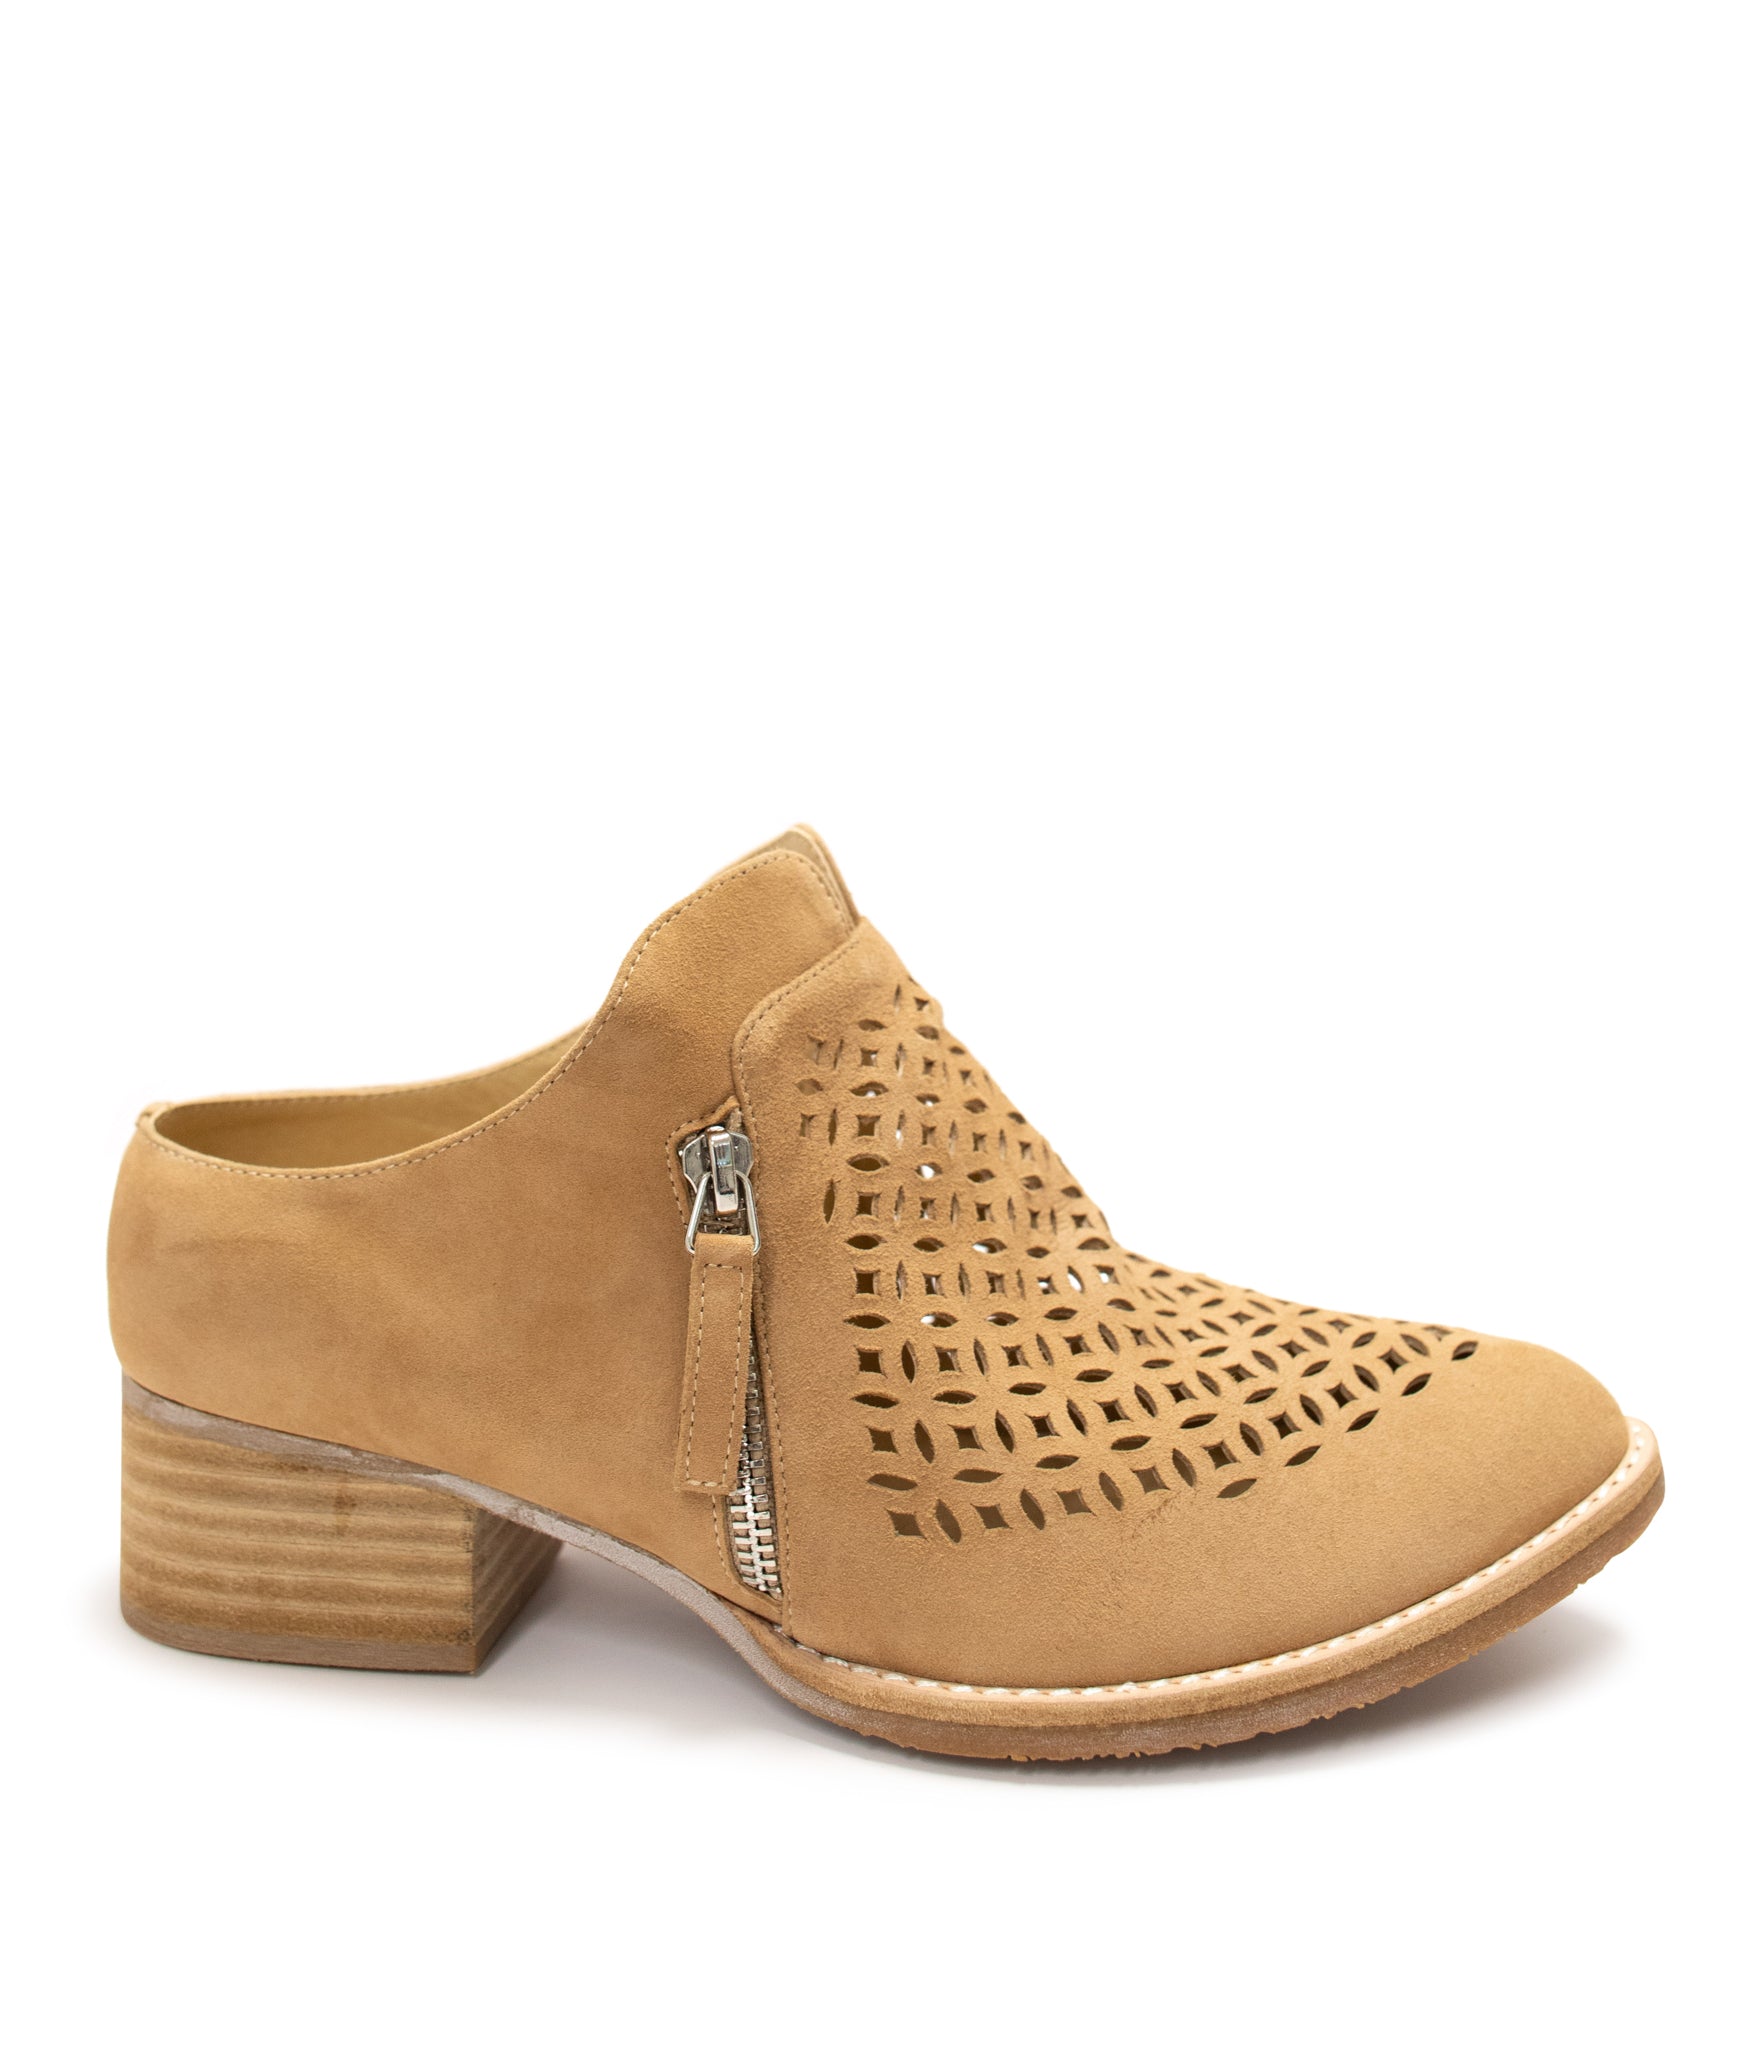 Taniss Leather Mule in Natural